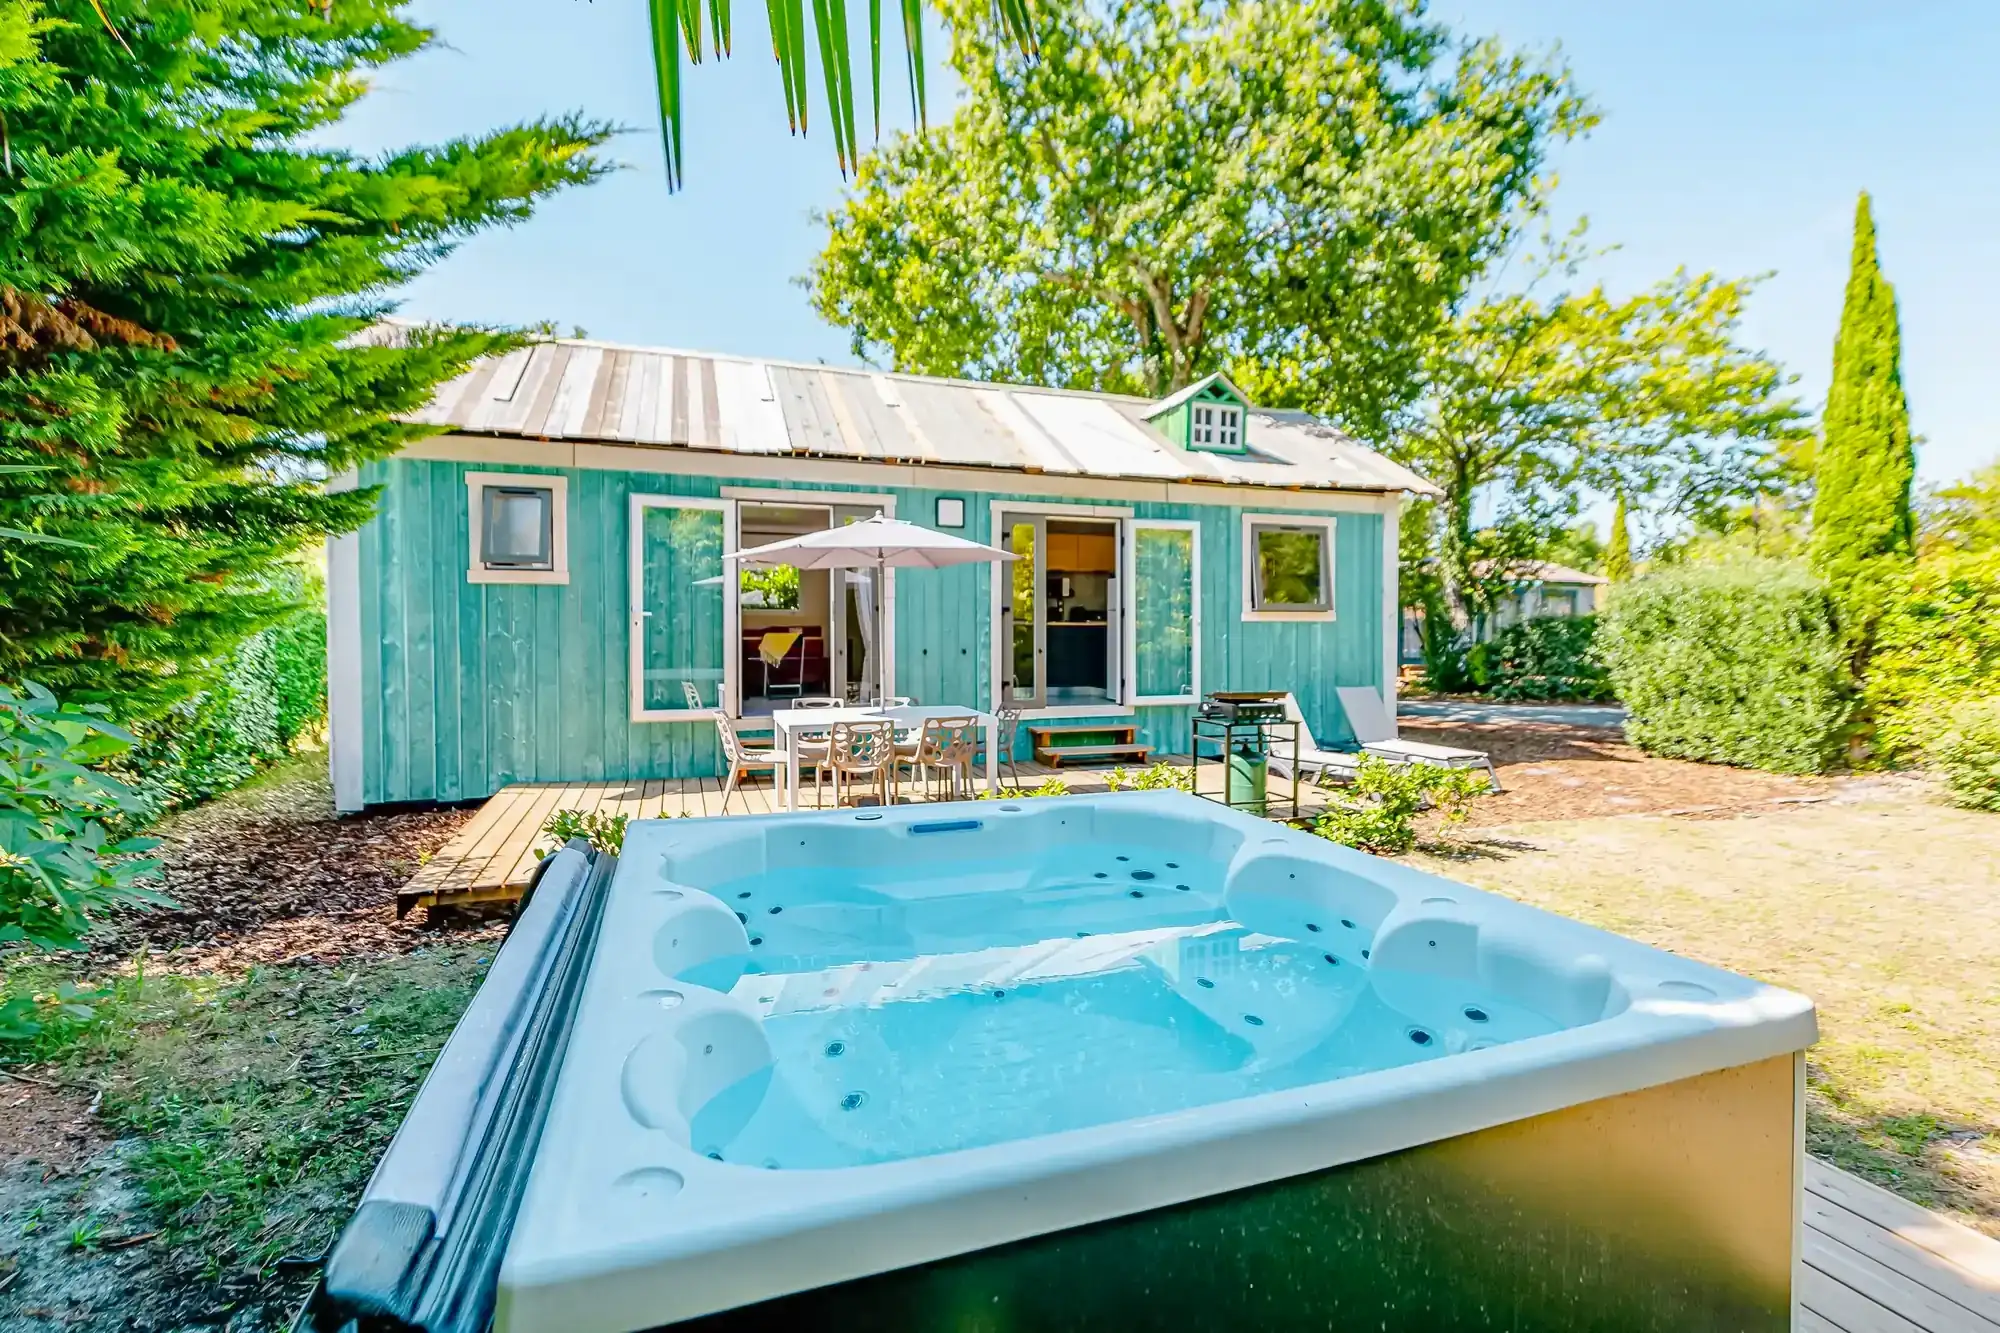 Premium cabin camping landes with jacuzzi